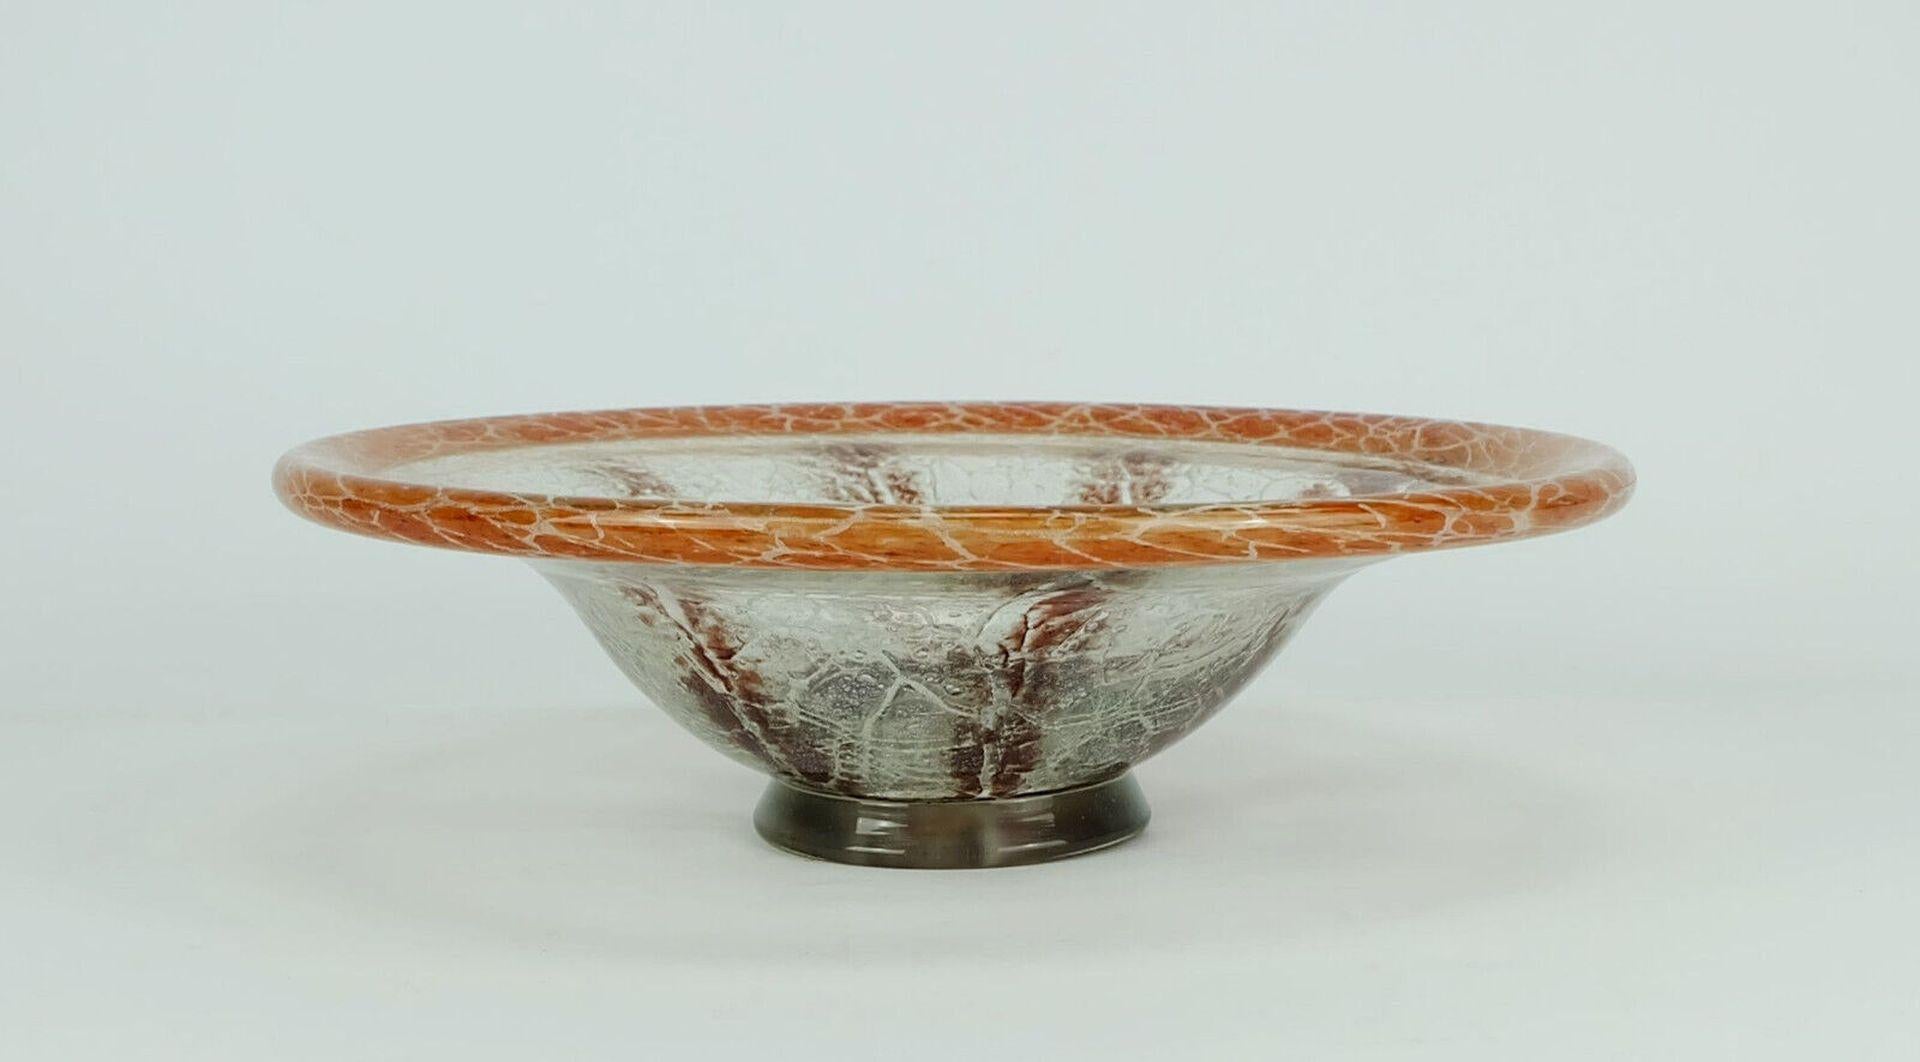 German Art Déco hand blown glass bowl designed by Karl Wiedmann for WMF (Wuerttembergische Metallwarenfabrik) in the 1930s. Orange, dark red and clear glass with powder inclusions. 

Very good condition, no damages.

Dimensions:
Diameter 9 1/2